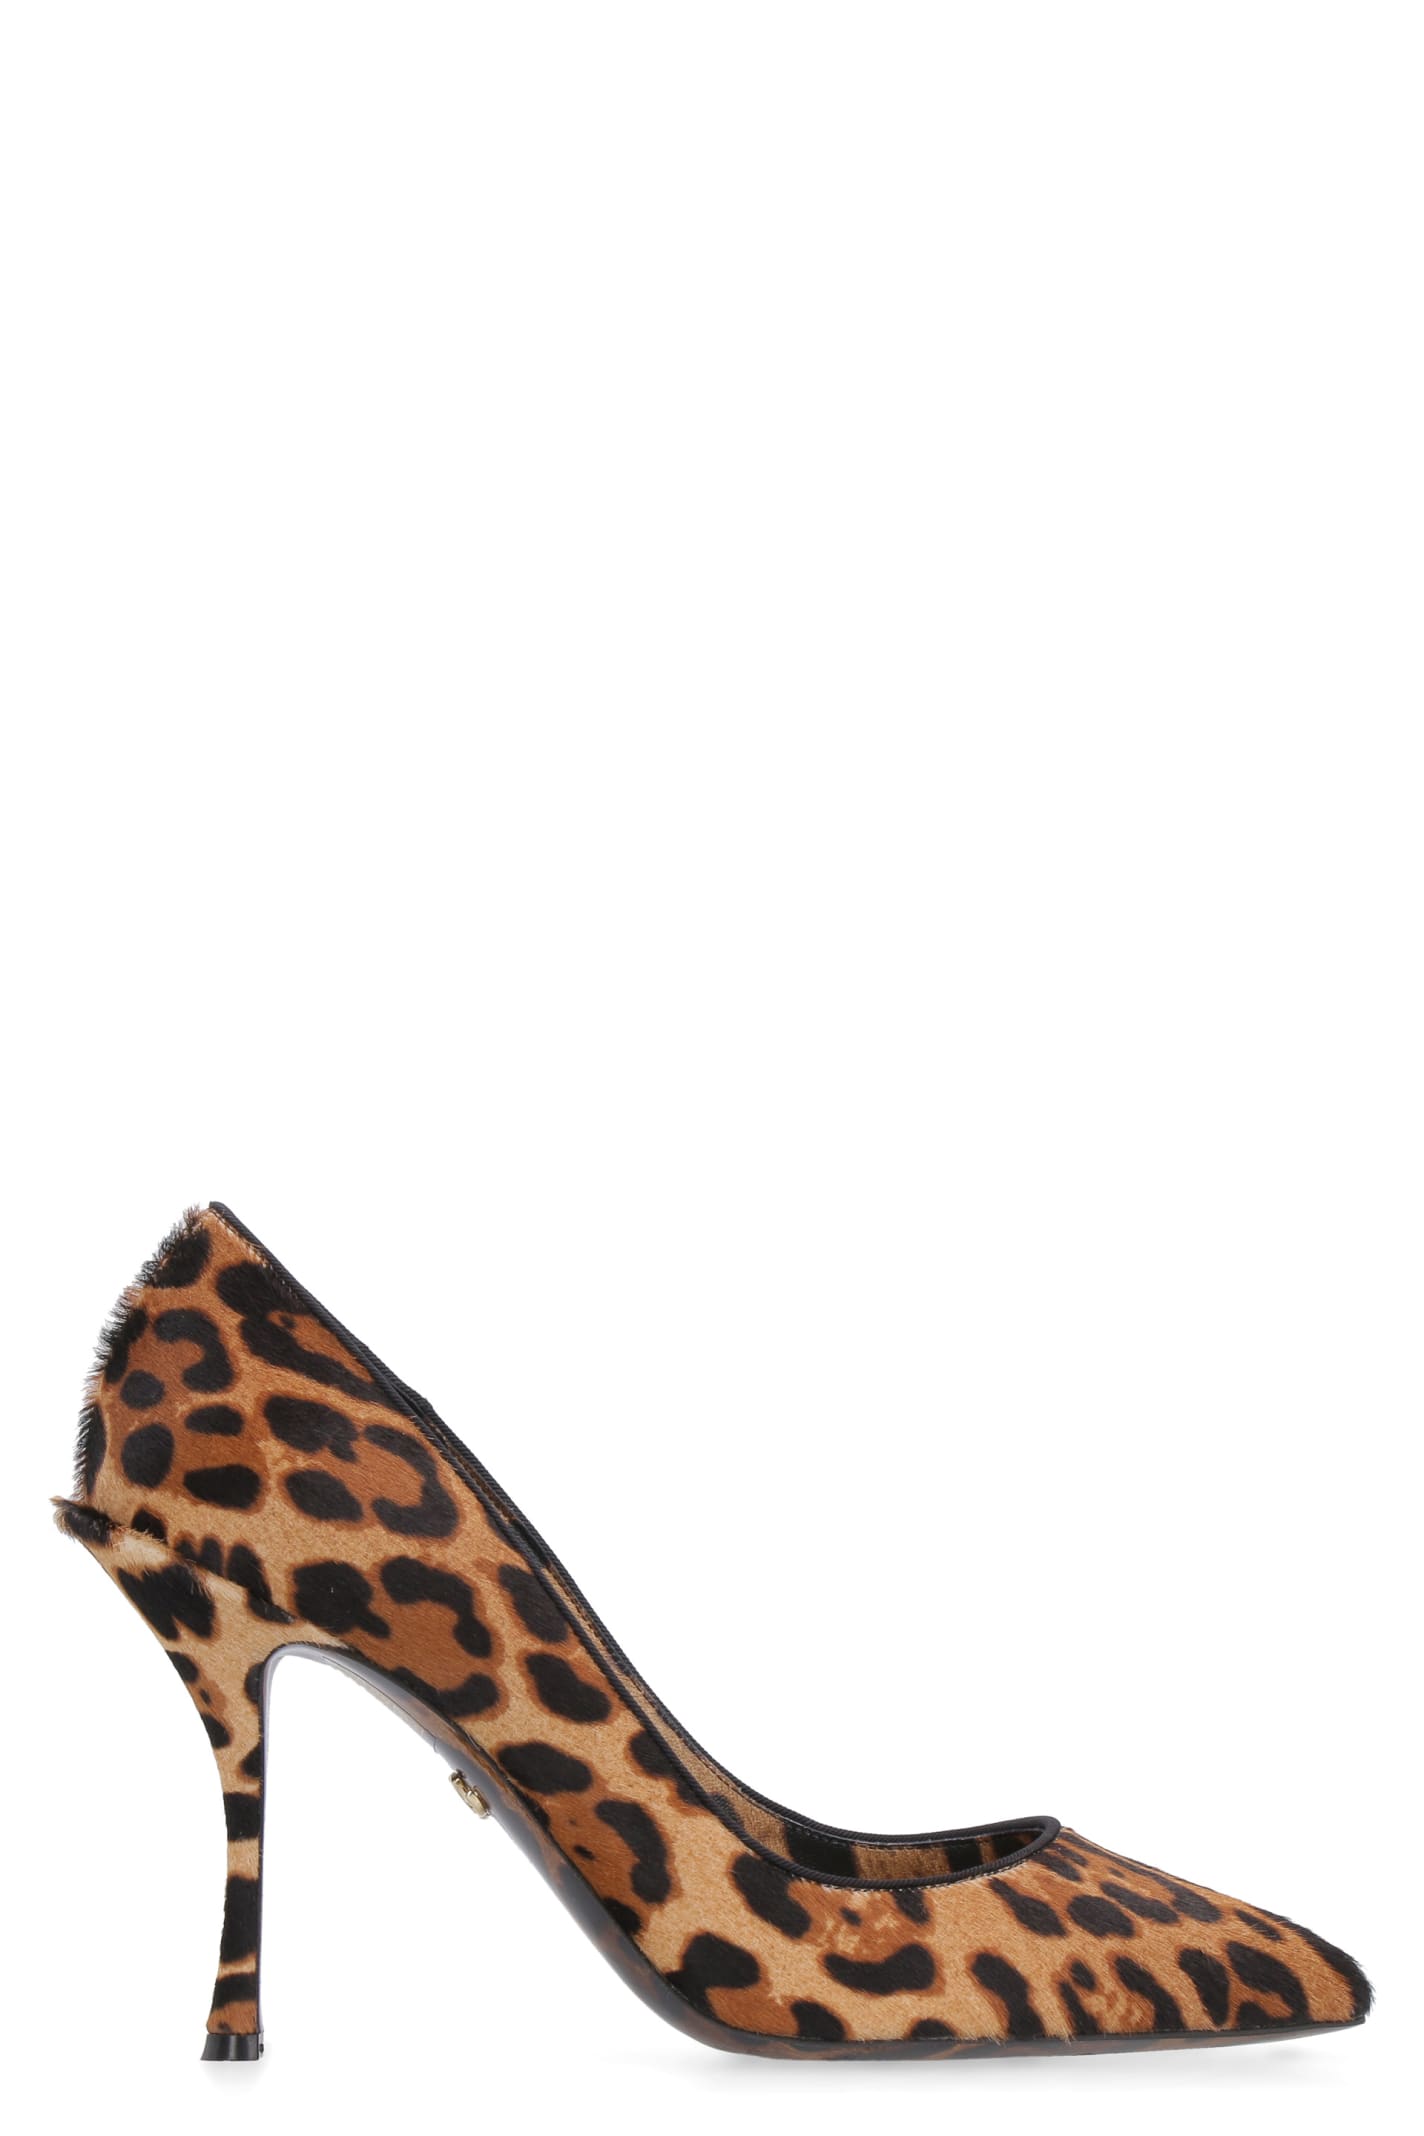 Buy Dolce & Gabbana Calf Hair Pointy-toe Pumps online, shop Dolce & Gabbana shoes with free shipping